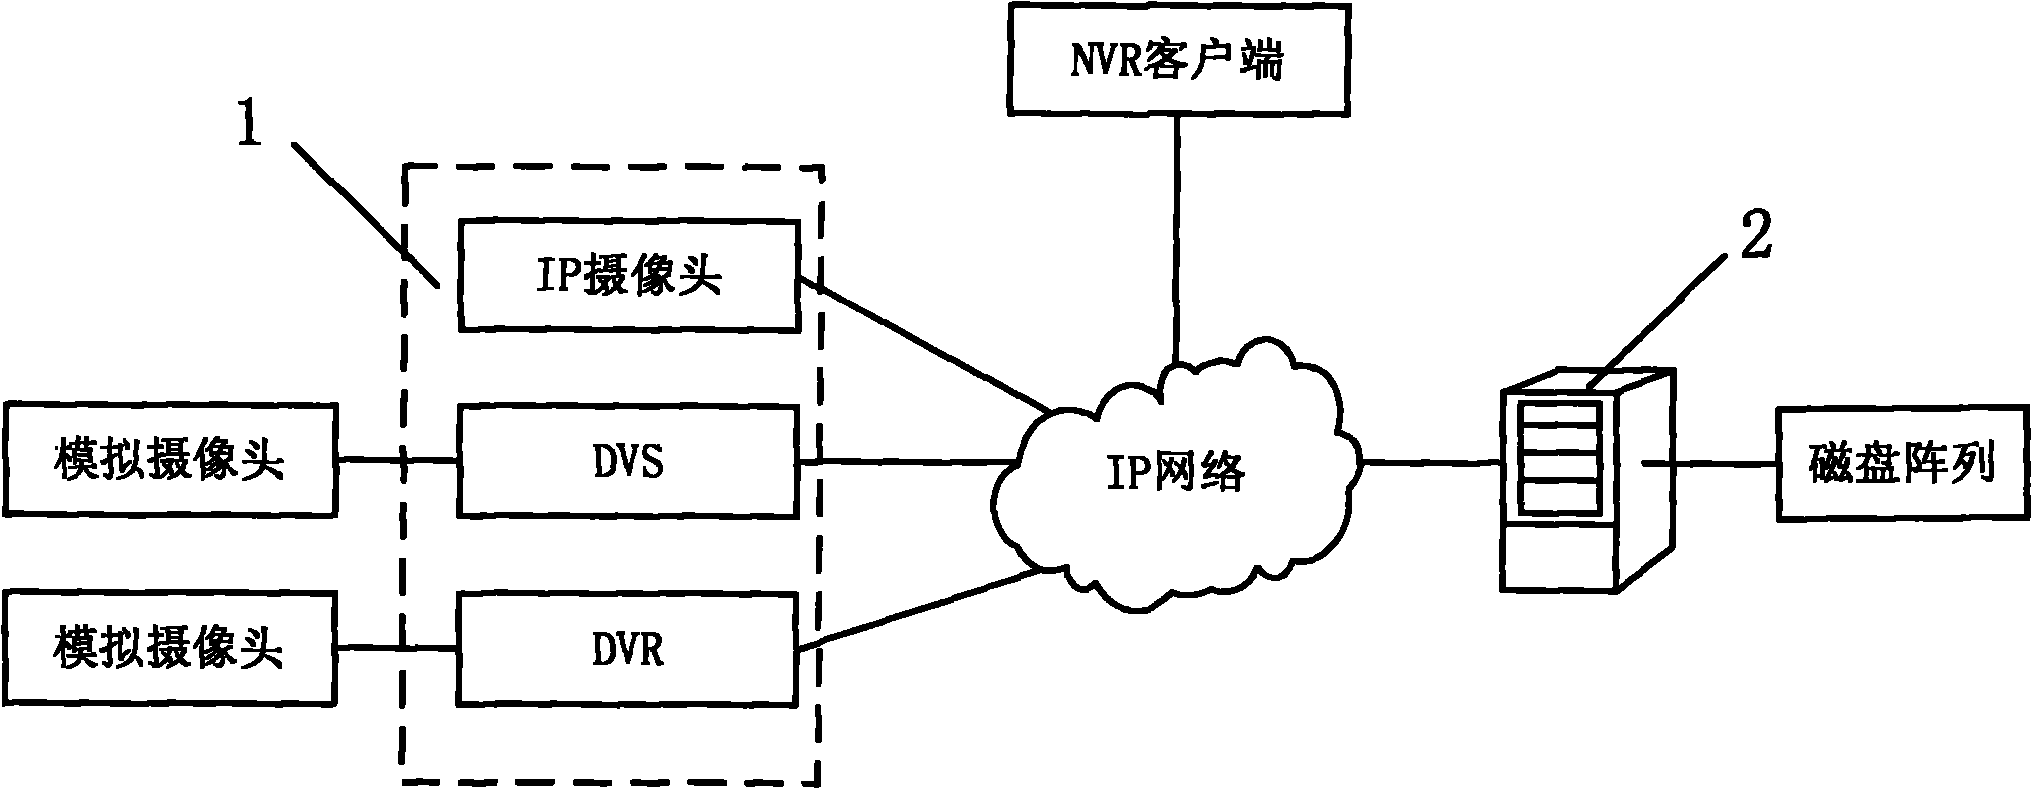 Network video recorder cluster video monitoring system and method